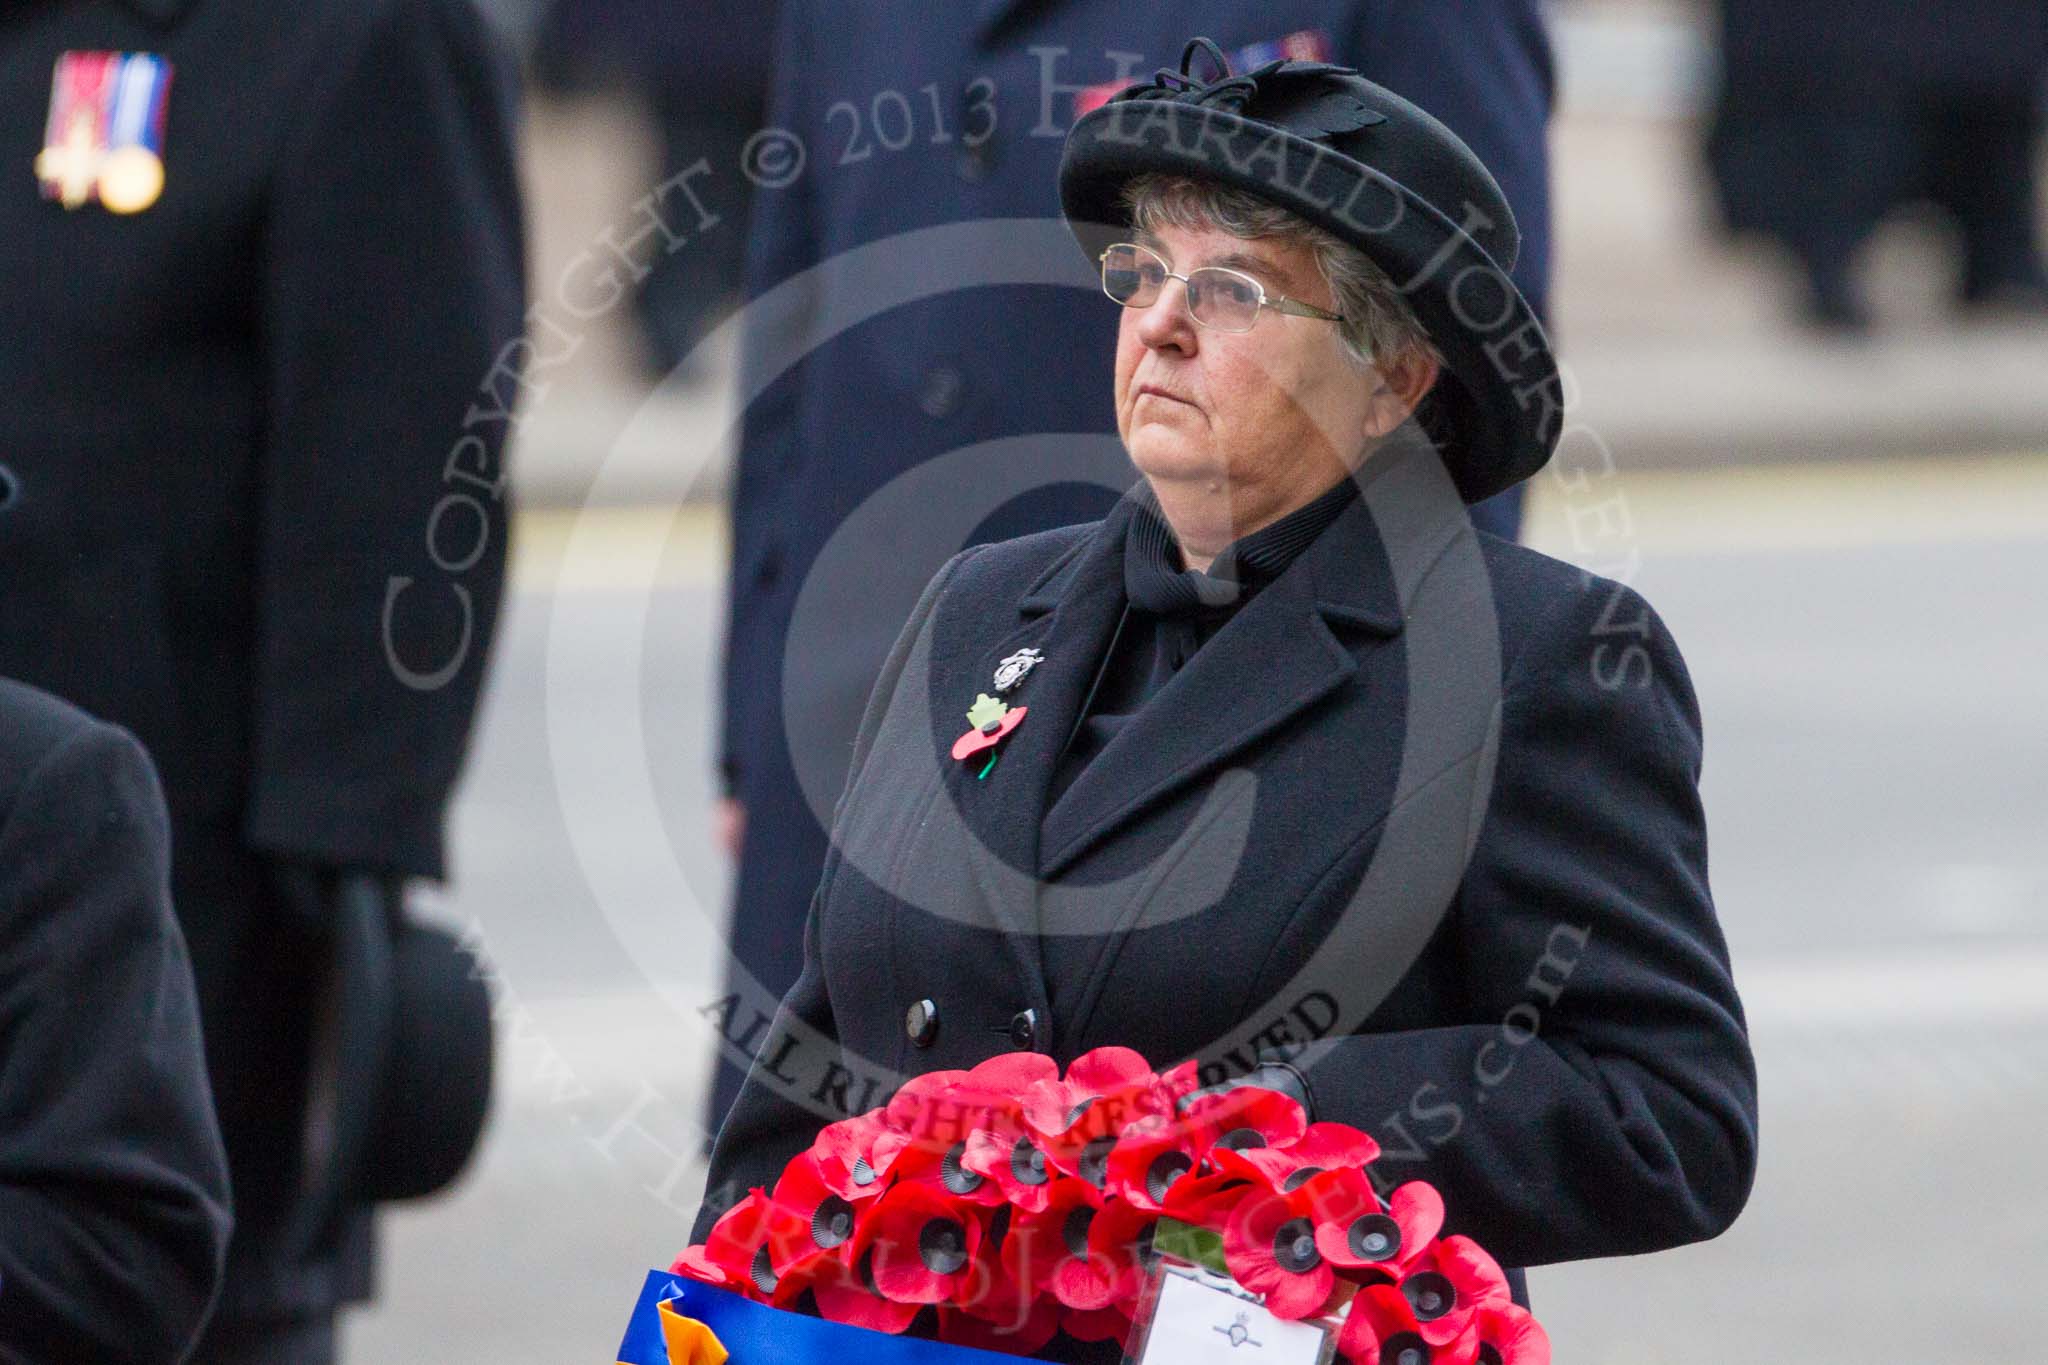 Remembrance Sunday at the Cenotaph 2015: The Royal British Legion Women’s Section National Chairman Mrs Marilyn Humphry. Image #342, 08 November 2015 11:25 Whitehall, London, UK